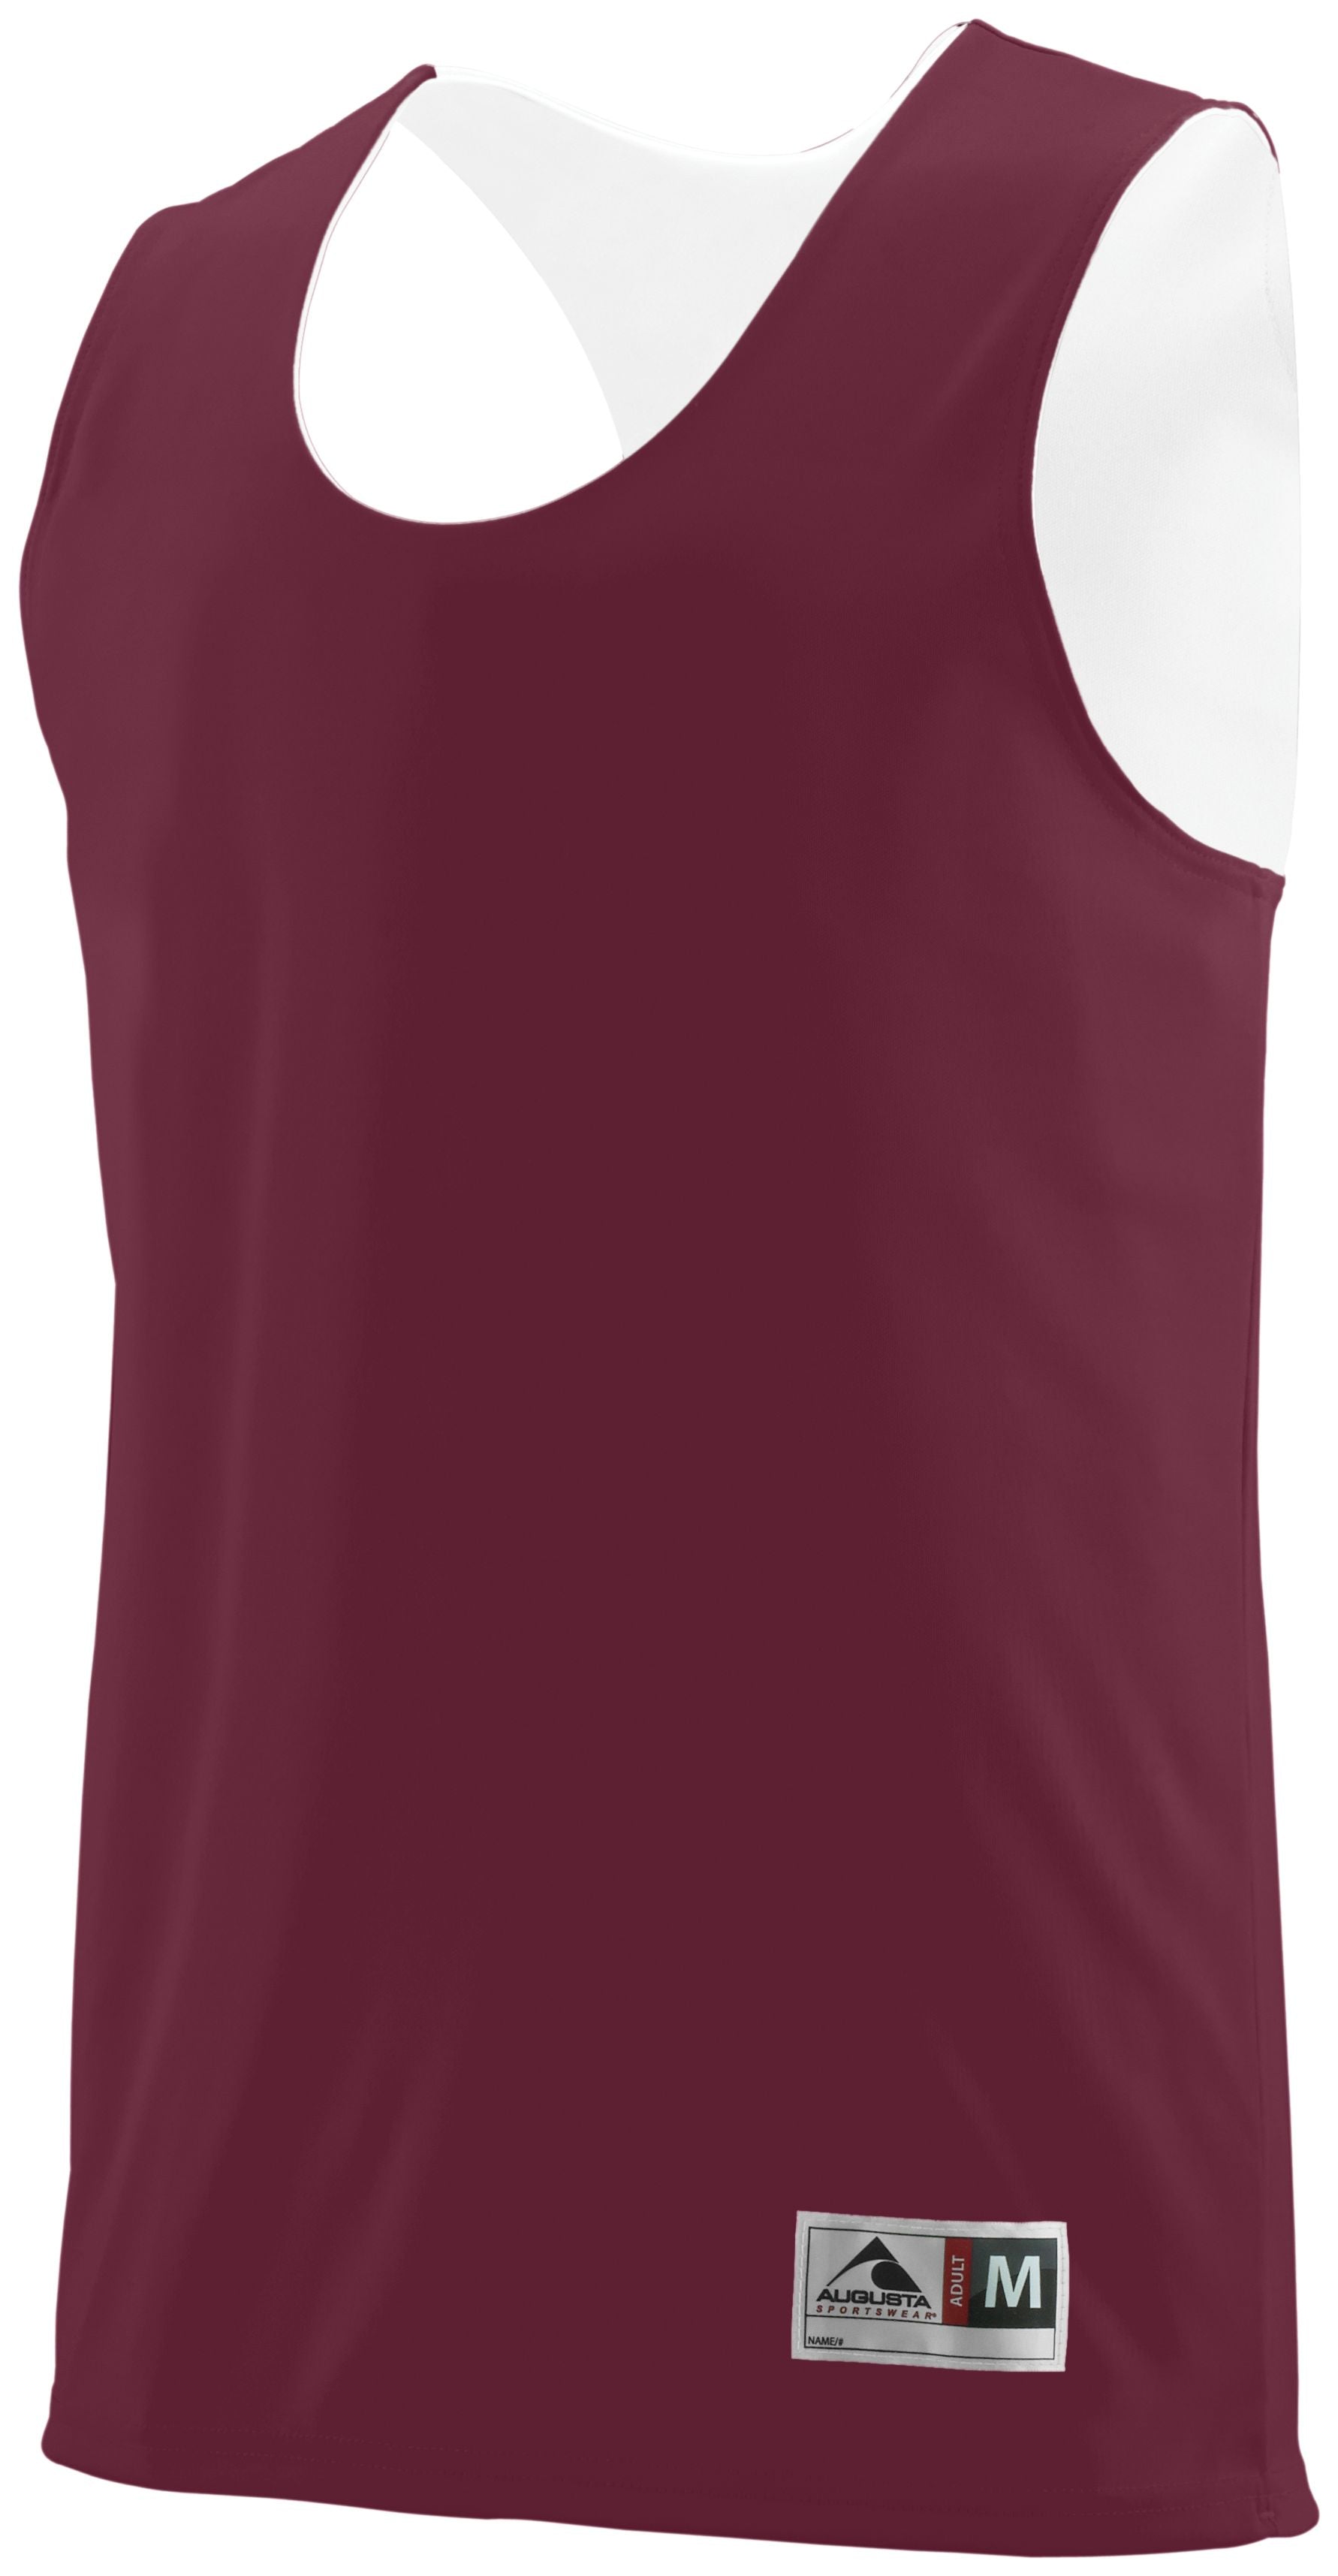 Augusta Sportswear Youth Reversible Wicking Tank in Maroon/White  -Part of the Youth, Youth-Tank, Augusta-Products, Basketball, Shirts, All-Sports, All-Sports-1 product lines at KanaleyCreations.com